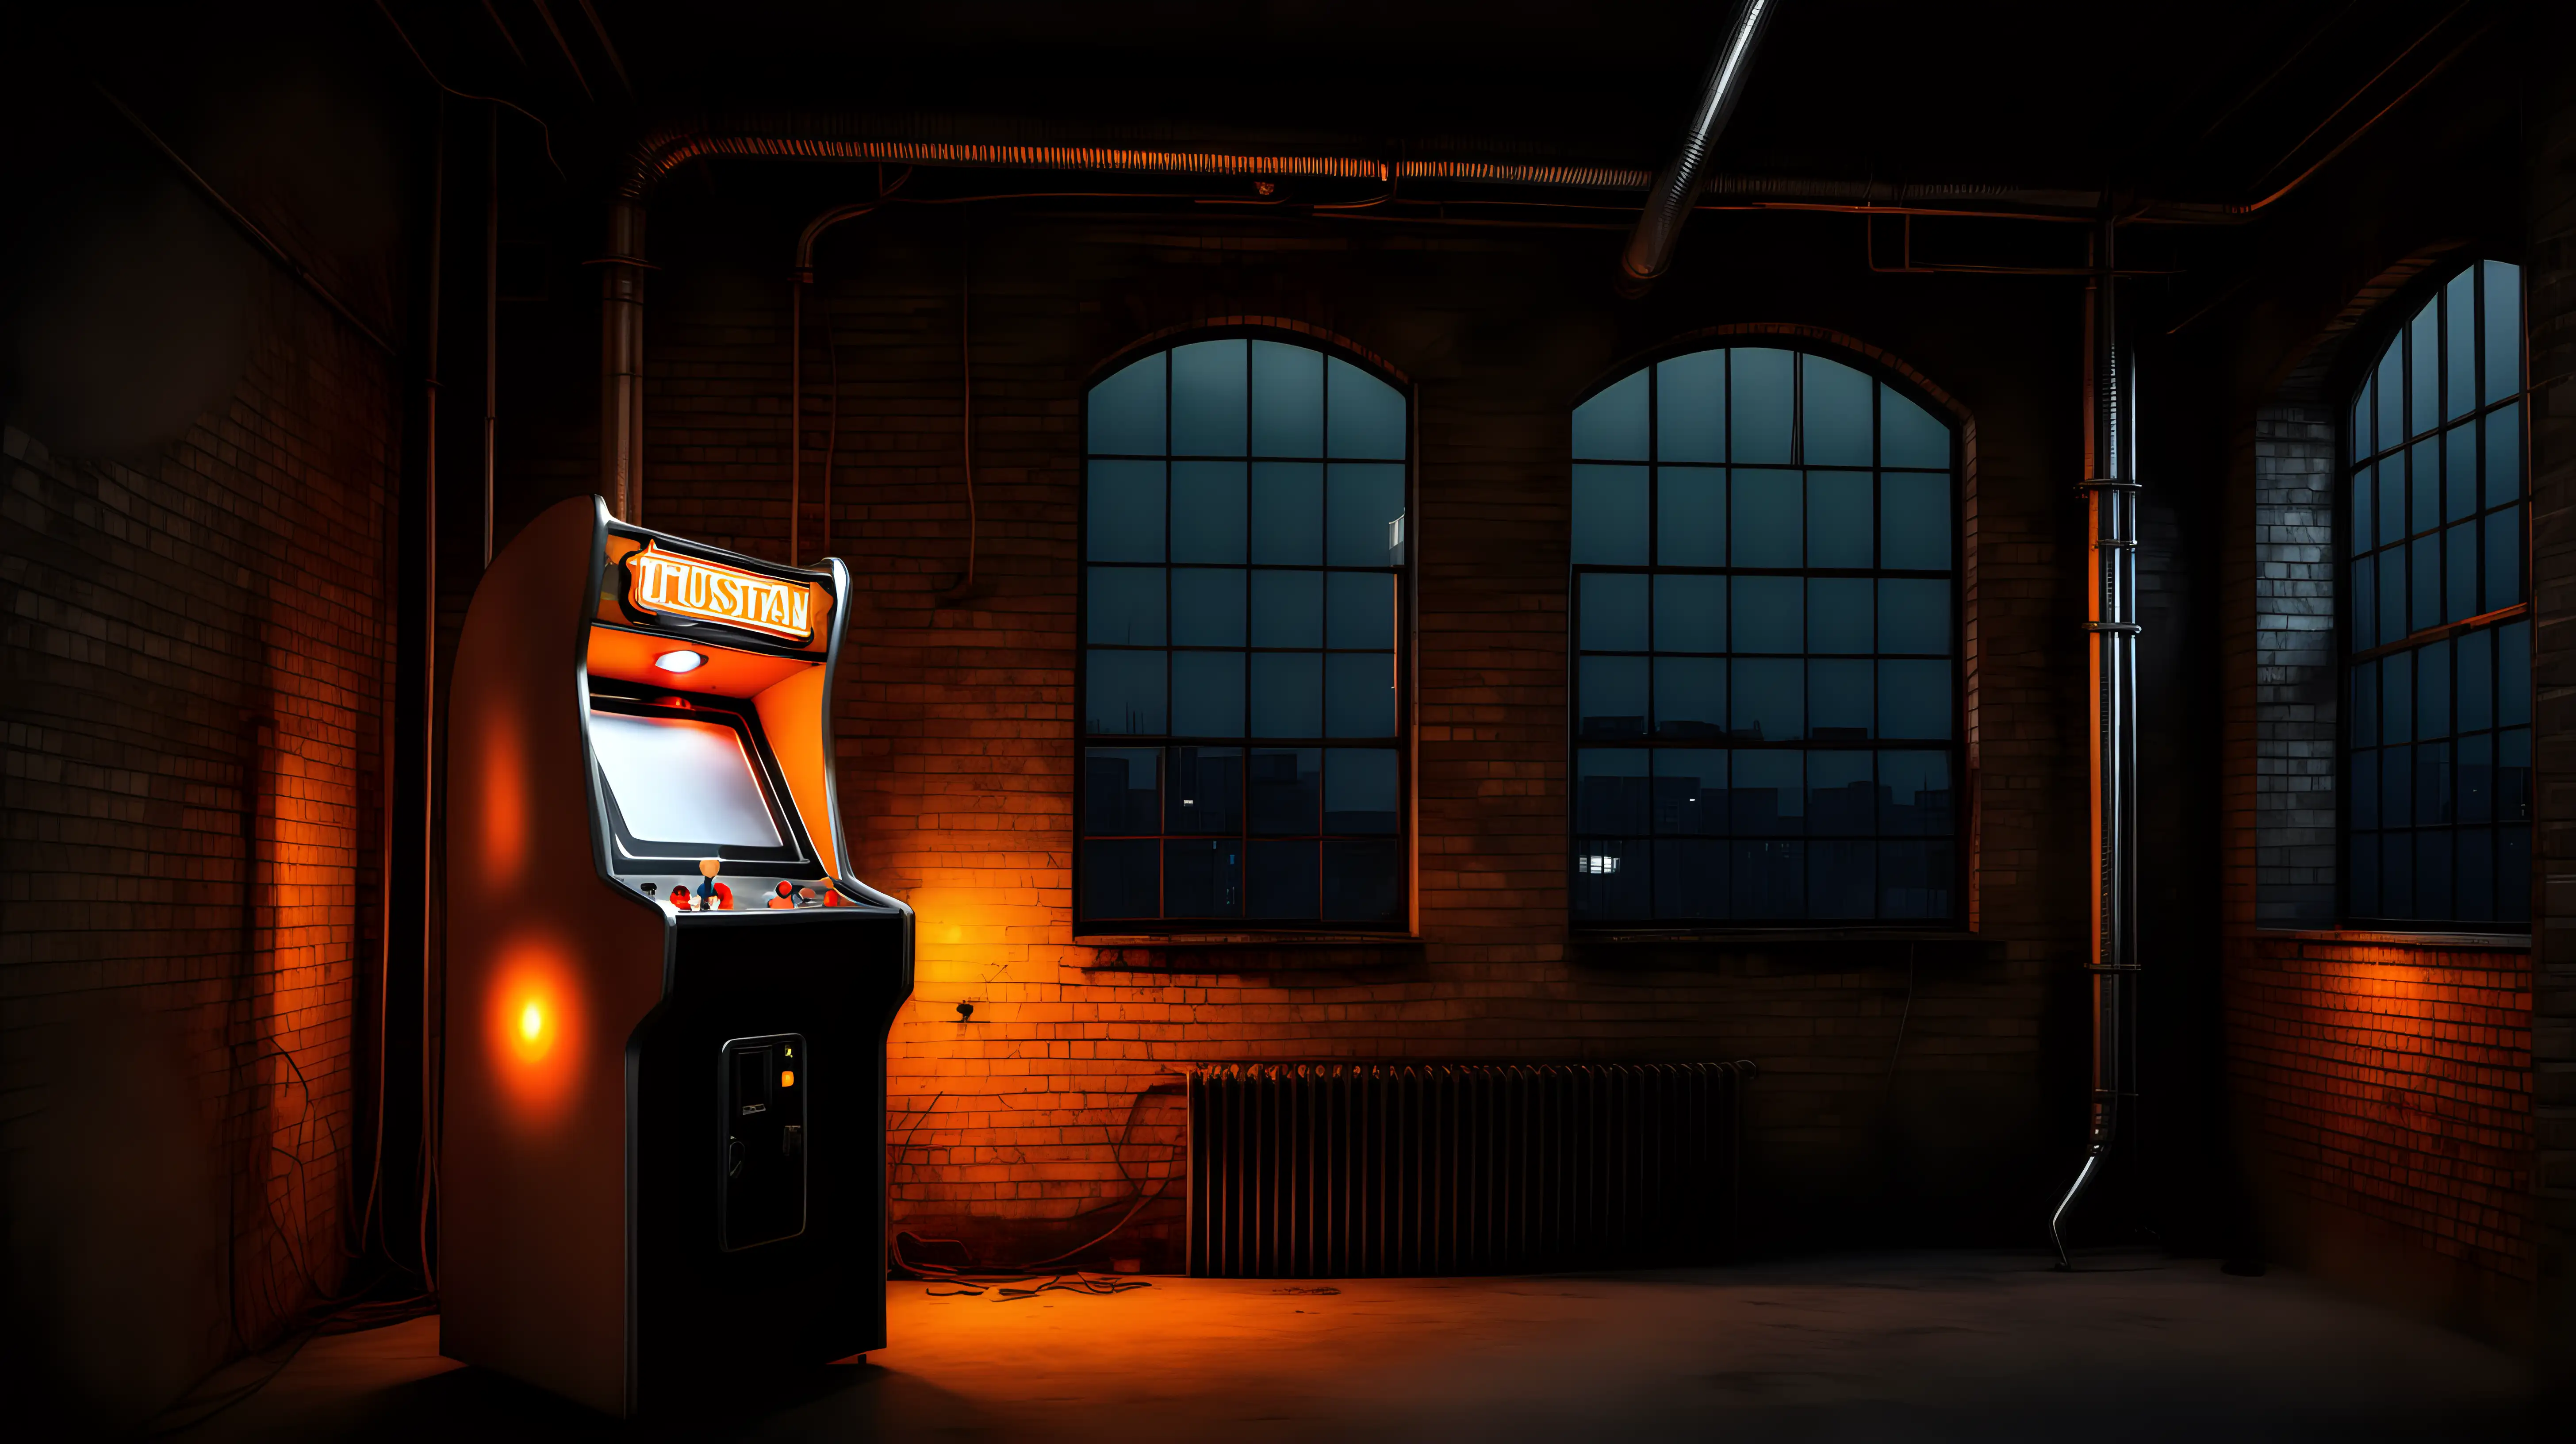 INDUSTRIAL STYLE LOFT  WITH LIGHTS ON ORAGE Tungsten LIGHTING AND MOODY DARK NIGHT. AN OLD ARCADE MACHINE SOMEWHERE.

ONE WINDOW LEFT SIDE OF THE ROOM SHOWING THE NIGHT LIGHT